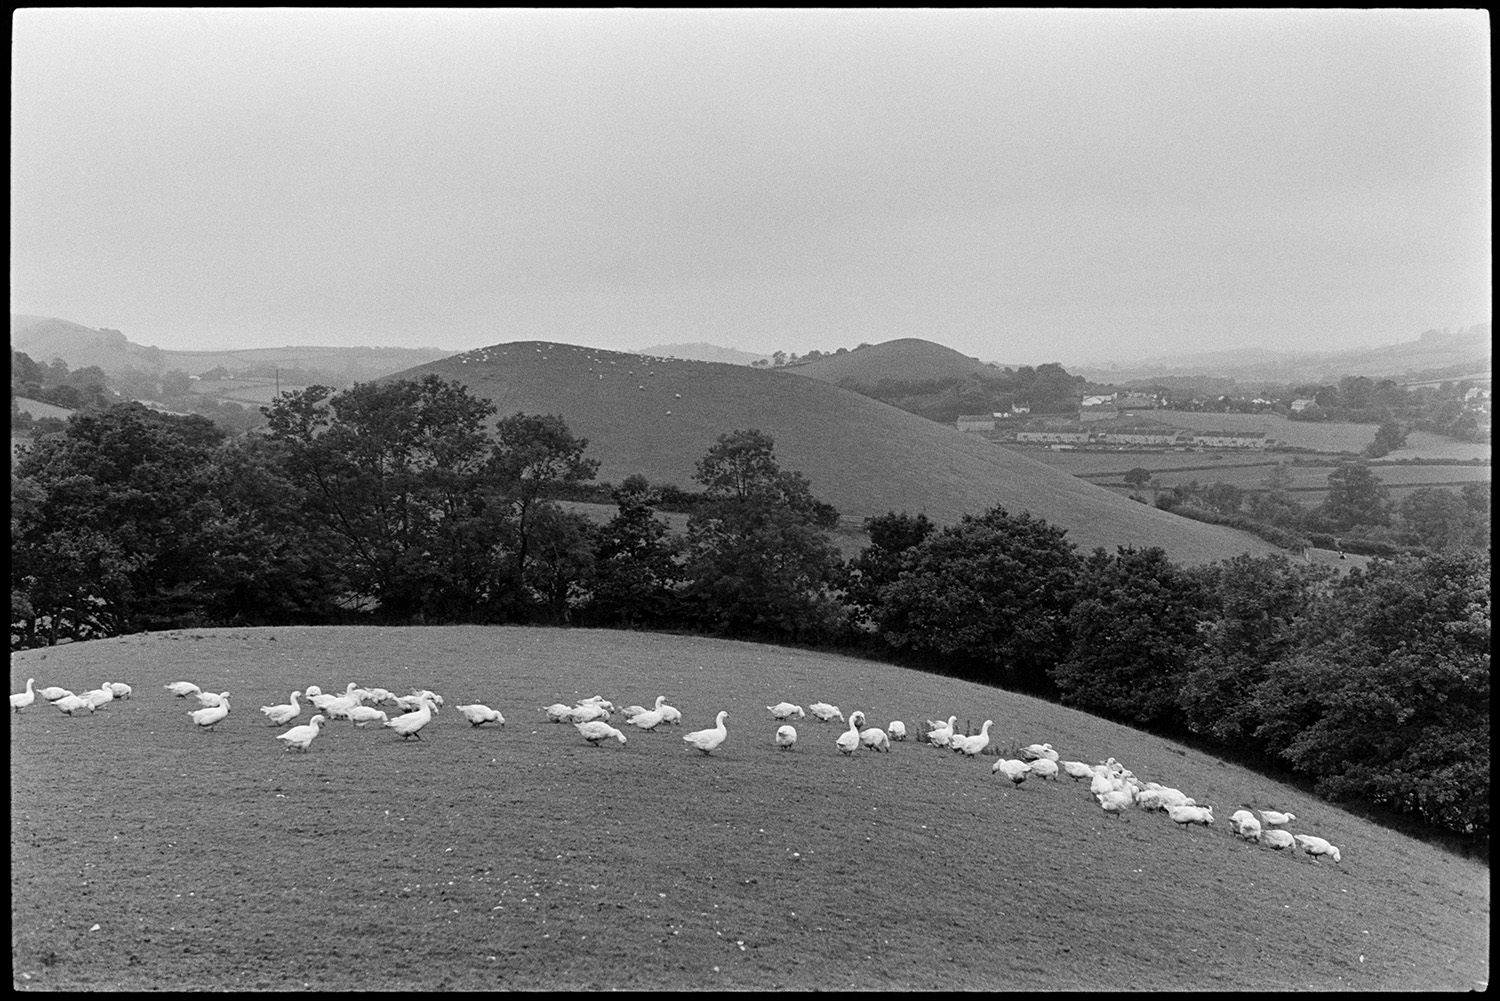 Large flock of geese, hillside. 
[A large flock of geese grazing in a field at Indiwell, Swimbridge. Trees and a hillside can be seen in the background.]